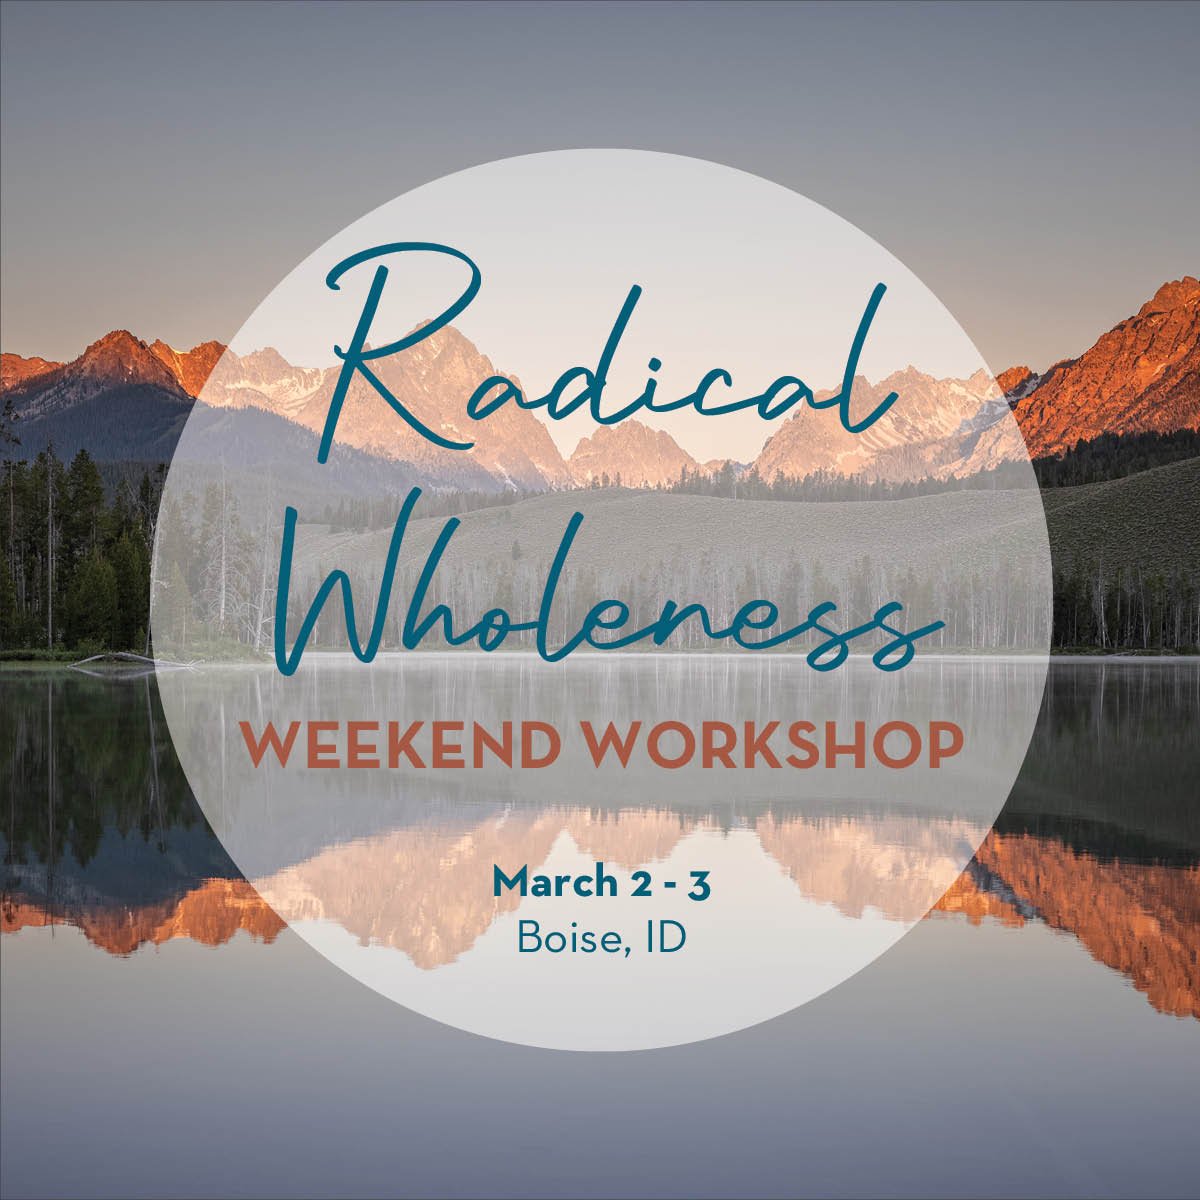 Radical Wholeness Weekend Workshop: Boise, ID - The Embodied Present Process